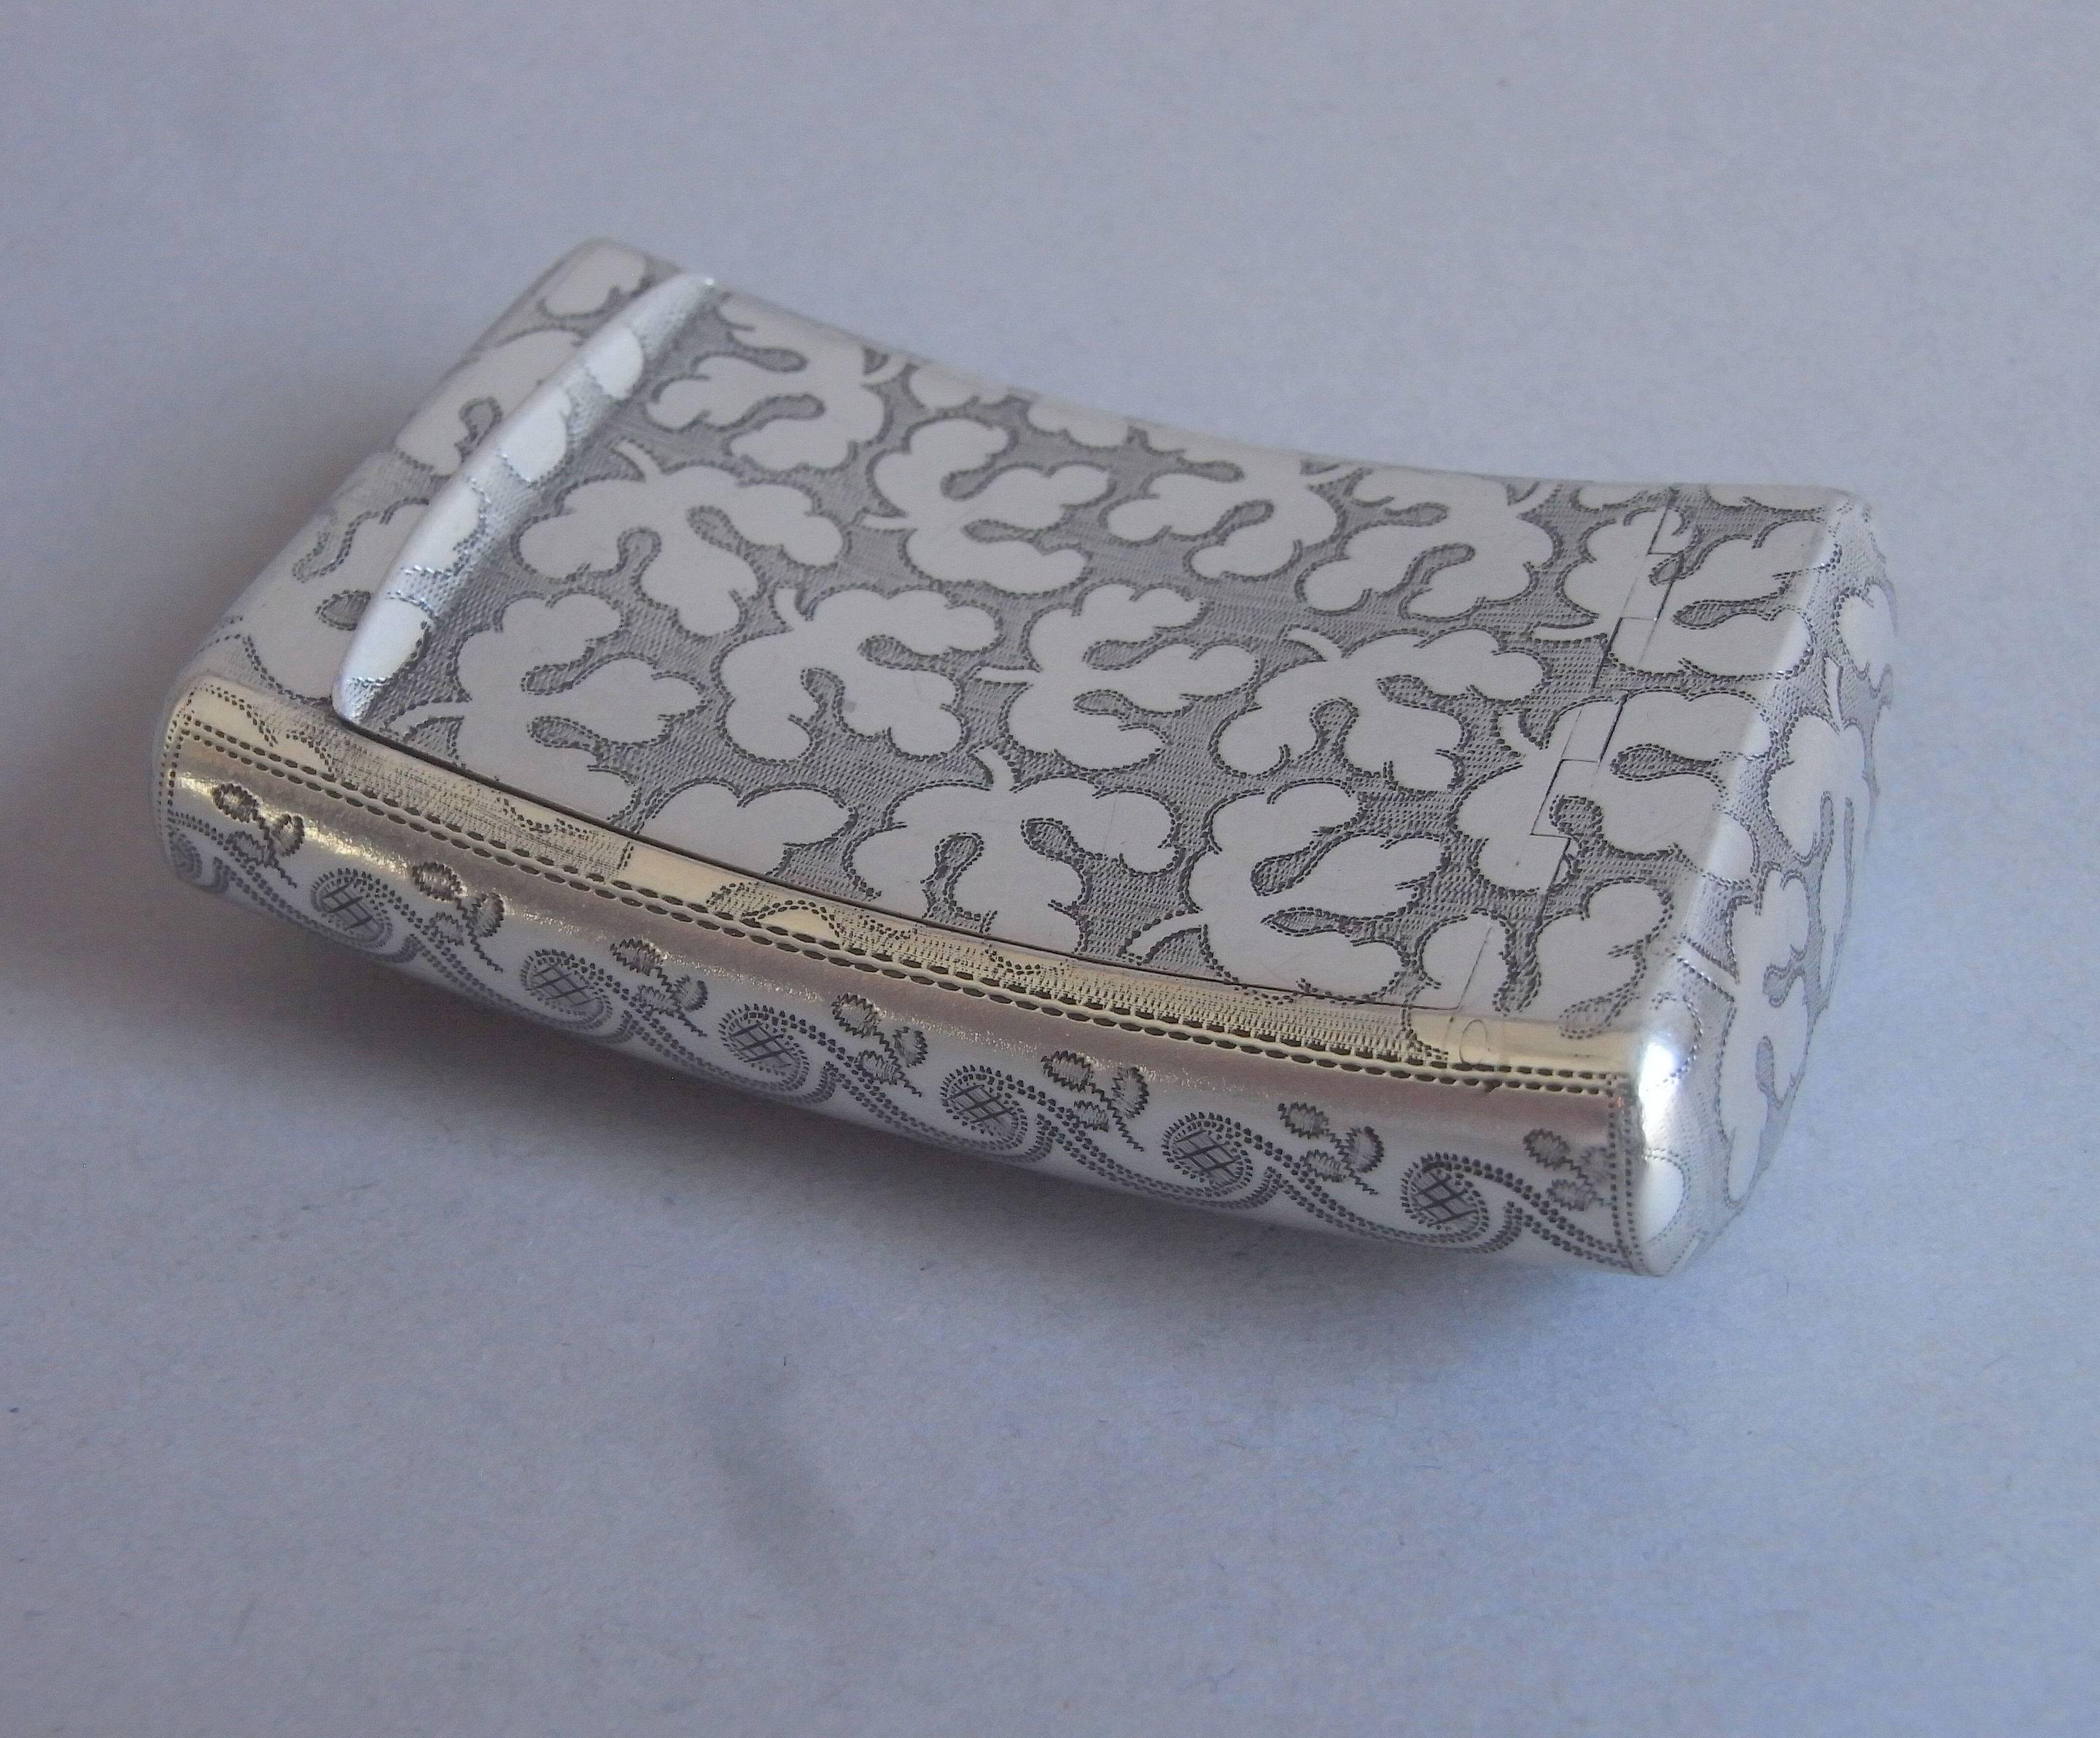 The pocket snuff box is of an unusually large curved form and is decorated on the hinged cover, base and two sides with unusual stylized sycamore leaves on a prick dot ground. The sides are engraved with a band of prick dot waves with foliate sprigs